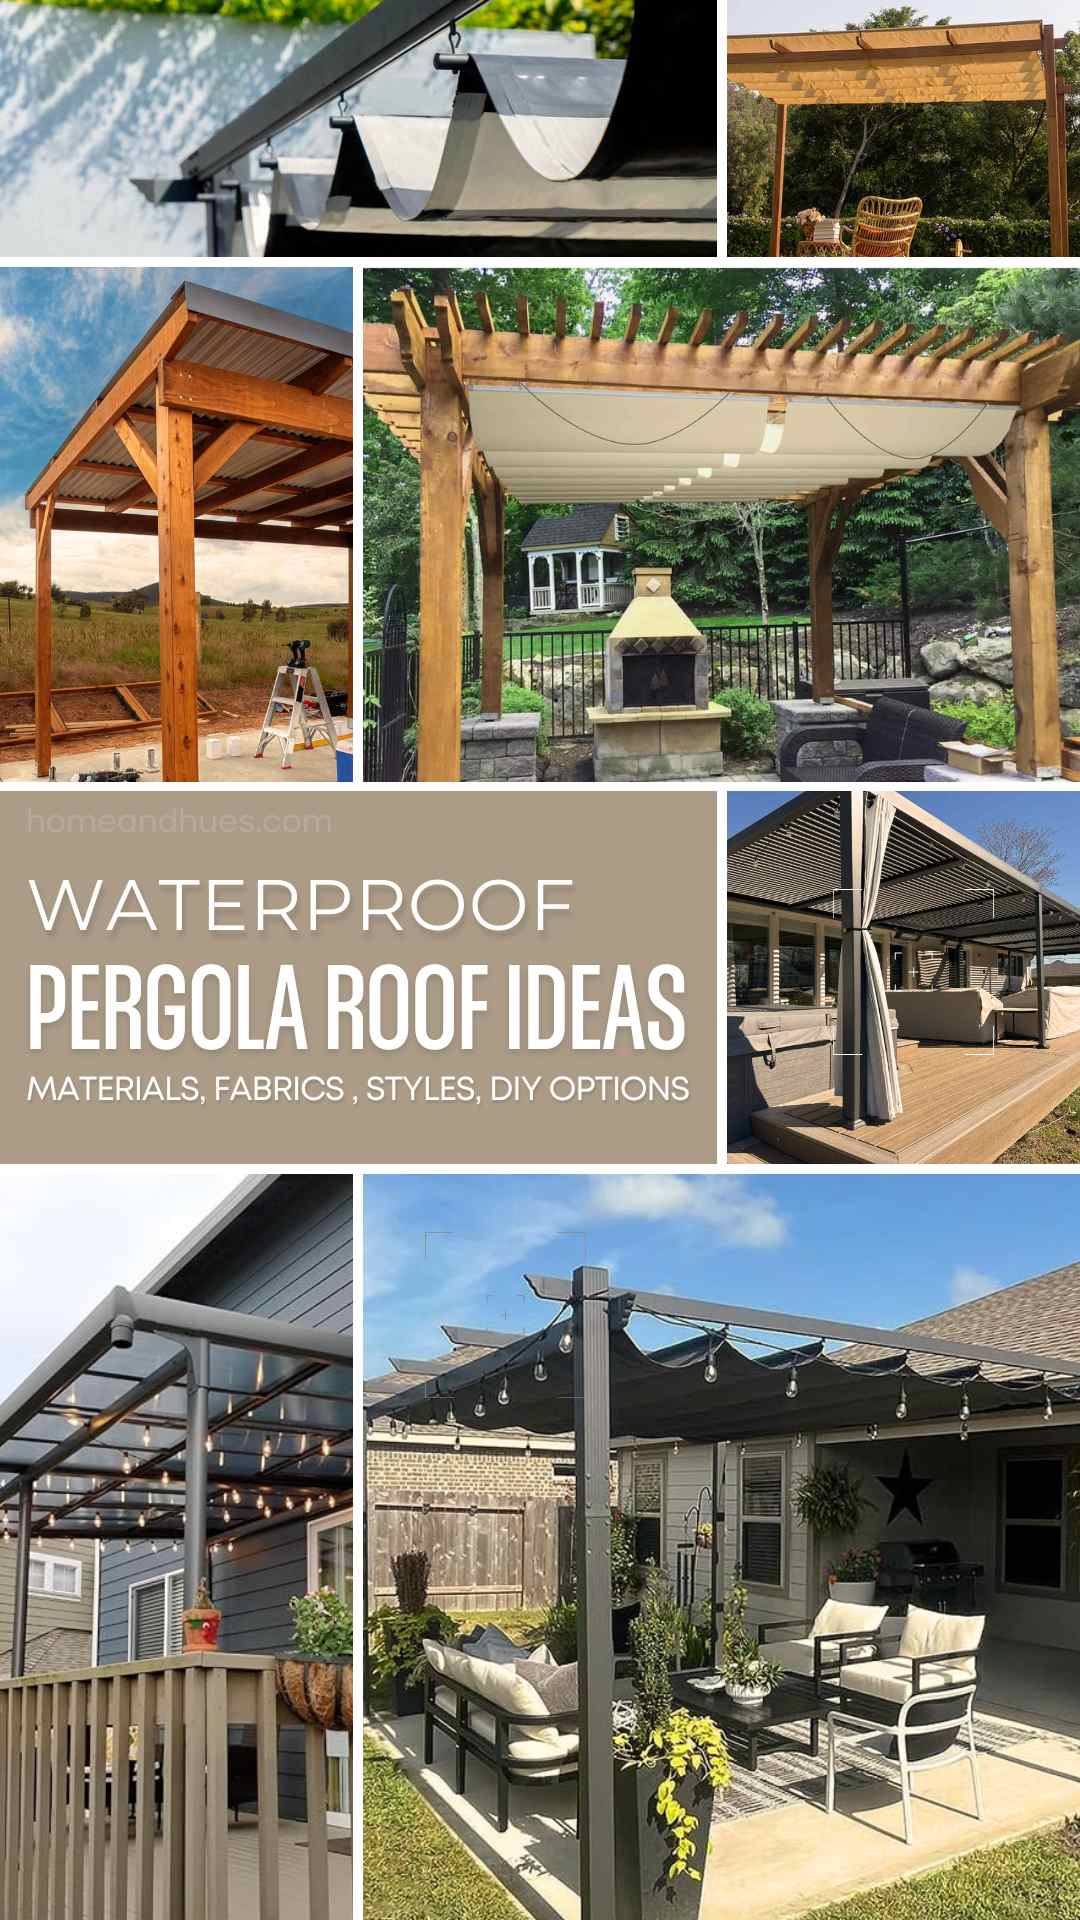 Waterproof Pergola Ideas - practical solutions for your pergola's roof and beyond, ensuring your outdoor space remains stylish, functional, and weather-proof. A collection of pergola roof materials, covers, and fabrics perfect for your next outdoor DIY project. These waterproof pergola roof ideas will keep your pergola dry during rain, snow, hail or extra sunshine.